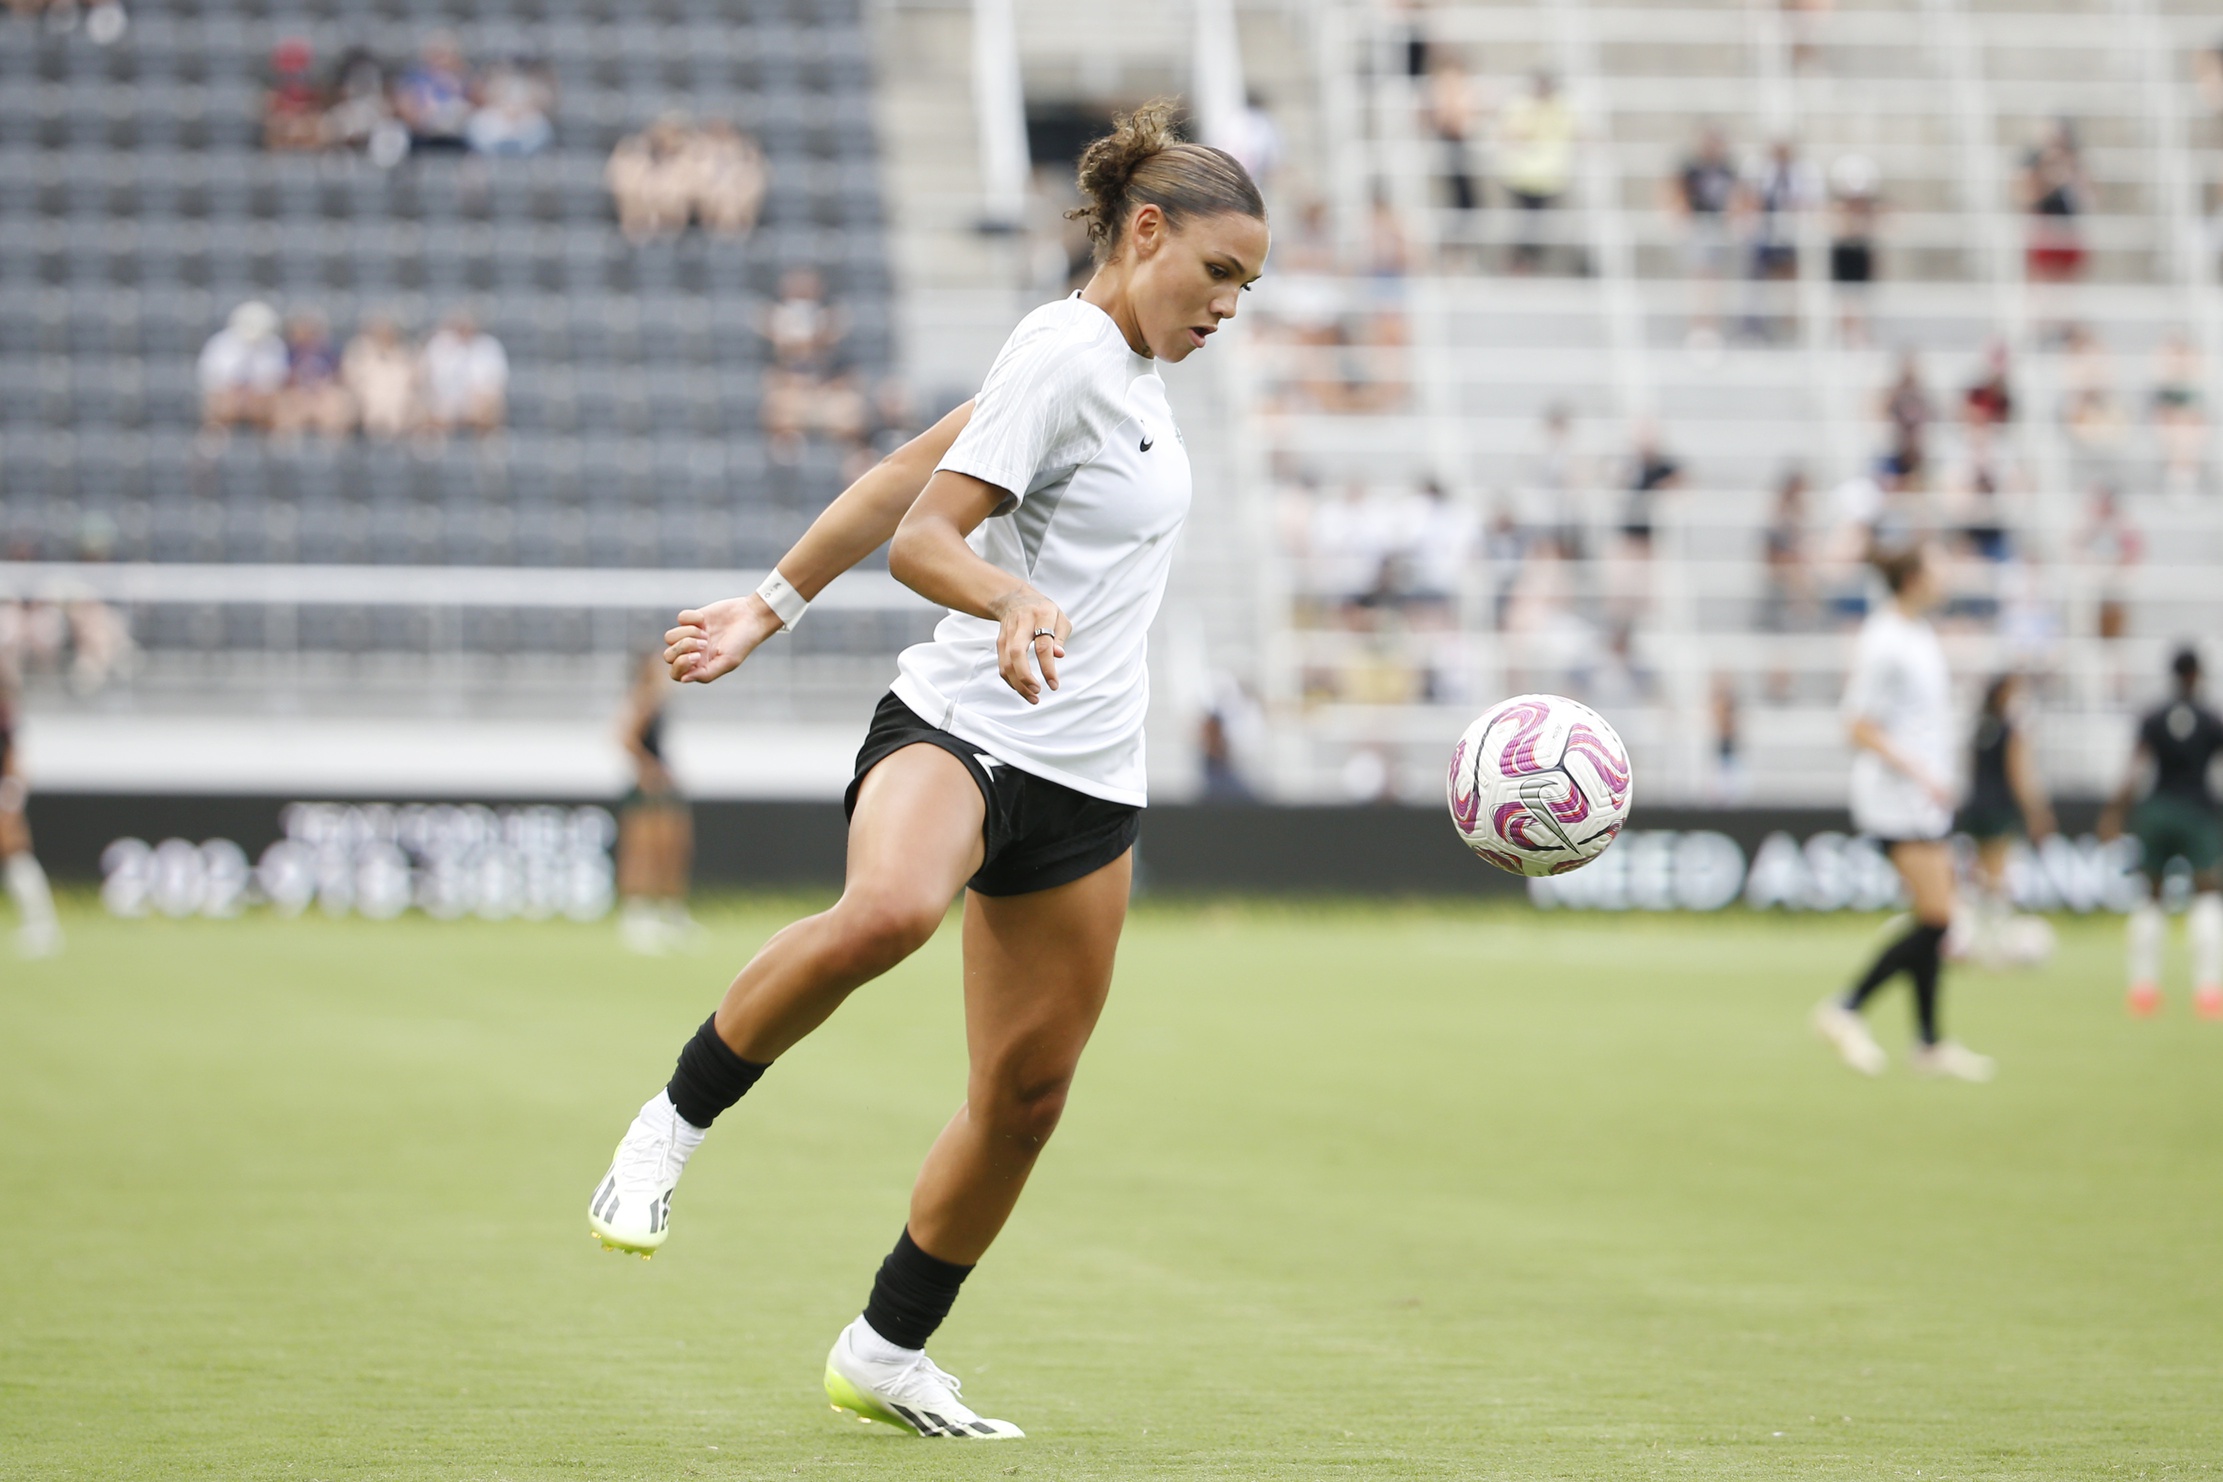 Nwsl: Portland Thorns FC at Washington Spirit, Is One of Three Players With an Increased Rating for EA FC 24 NWSL